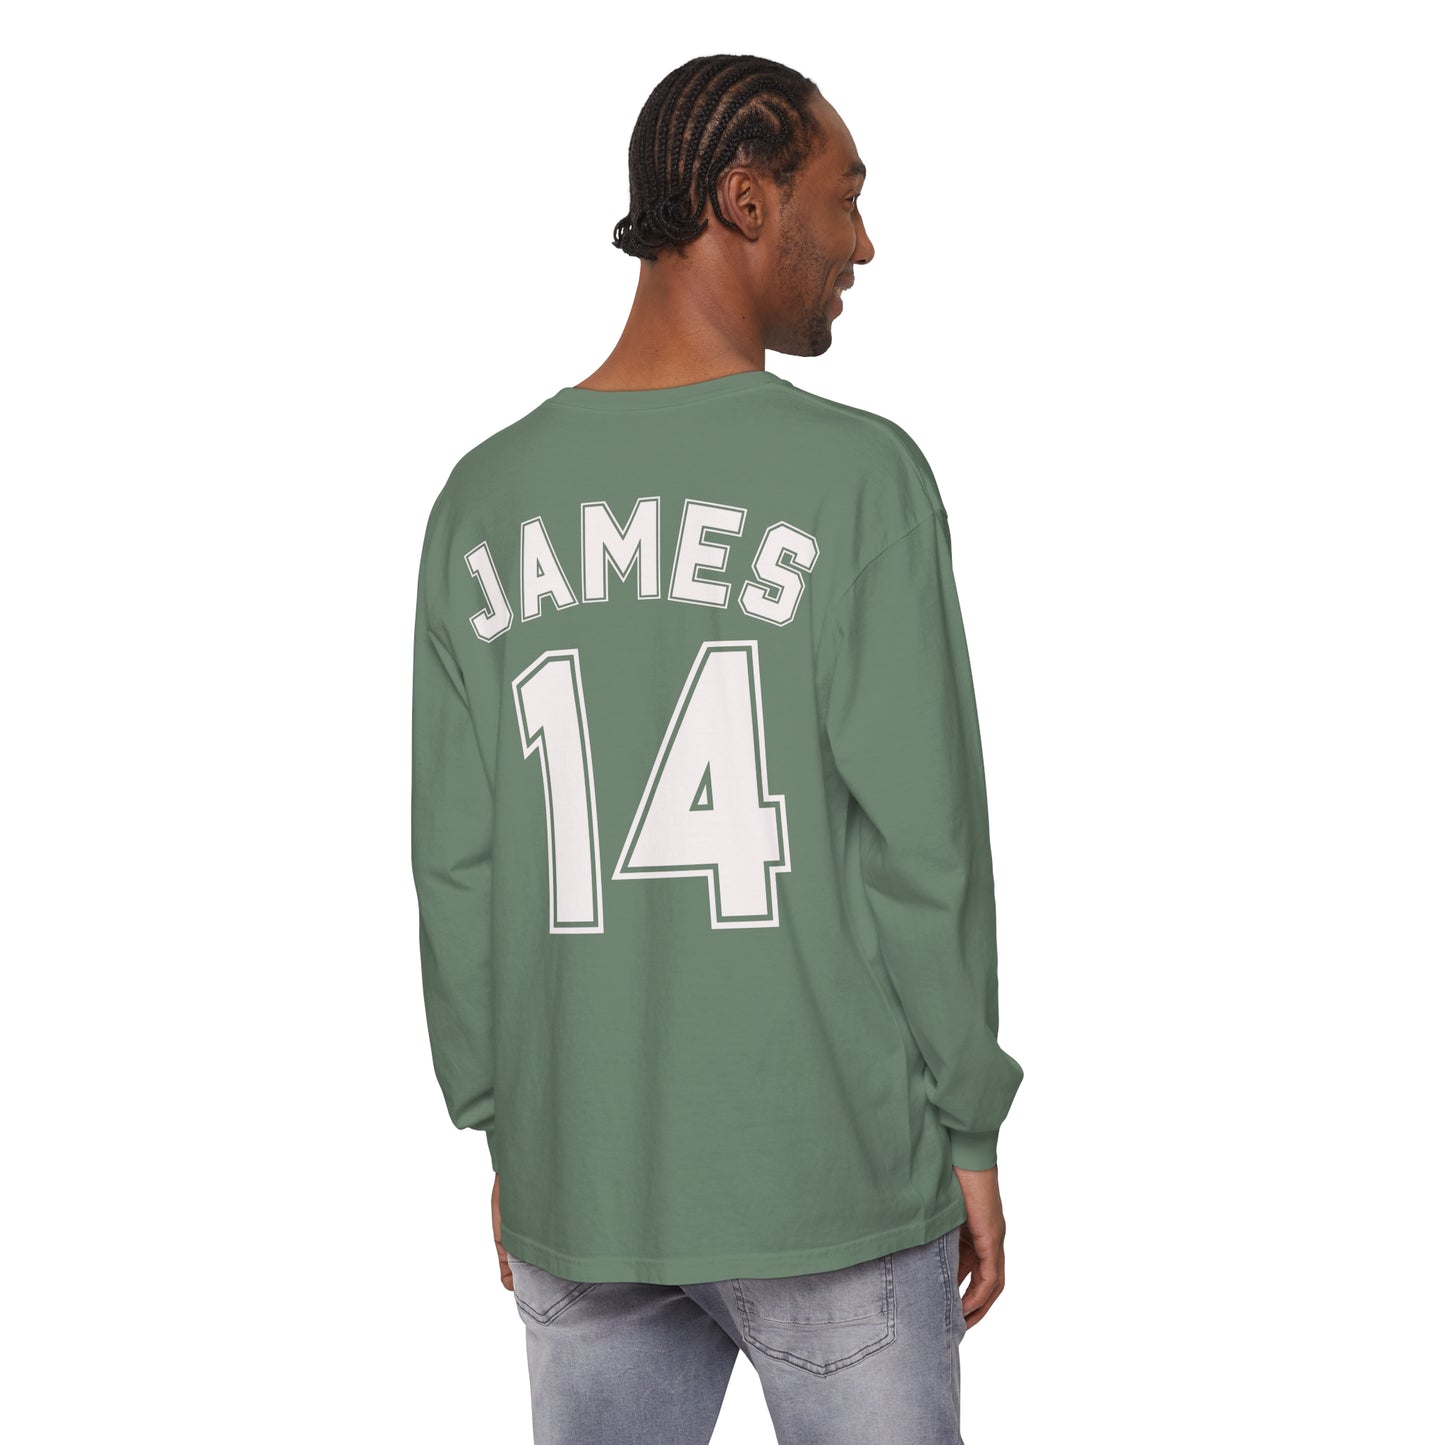 In My Baseball Mom Era | Personalized Name Comfort Colors Long Sleeve T-Shirt